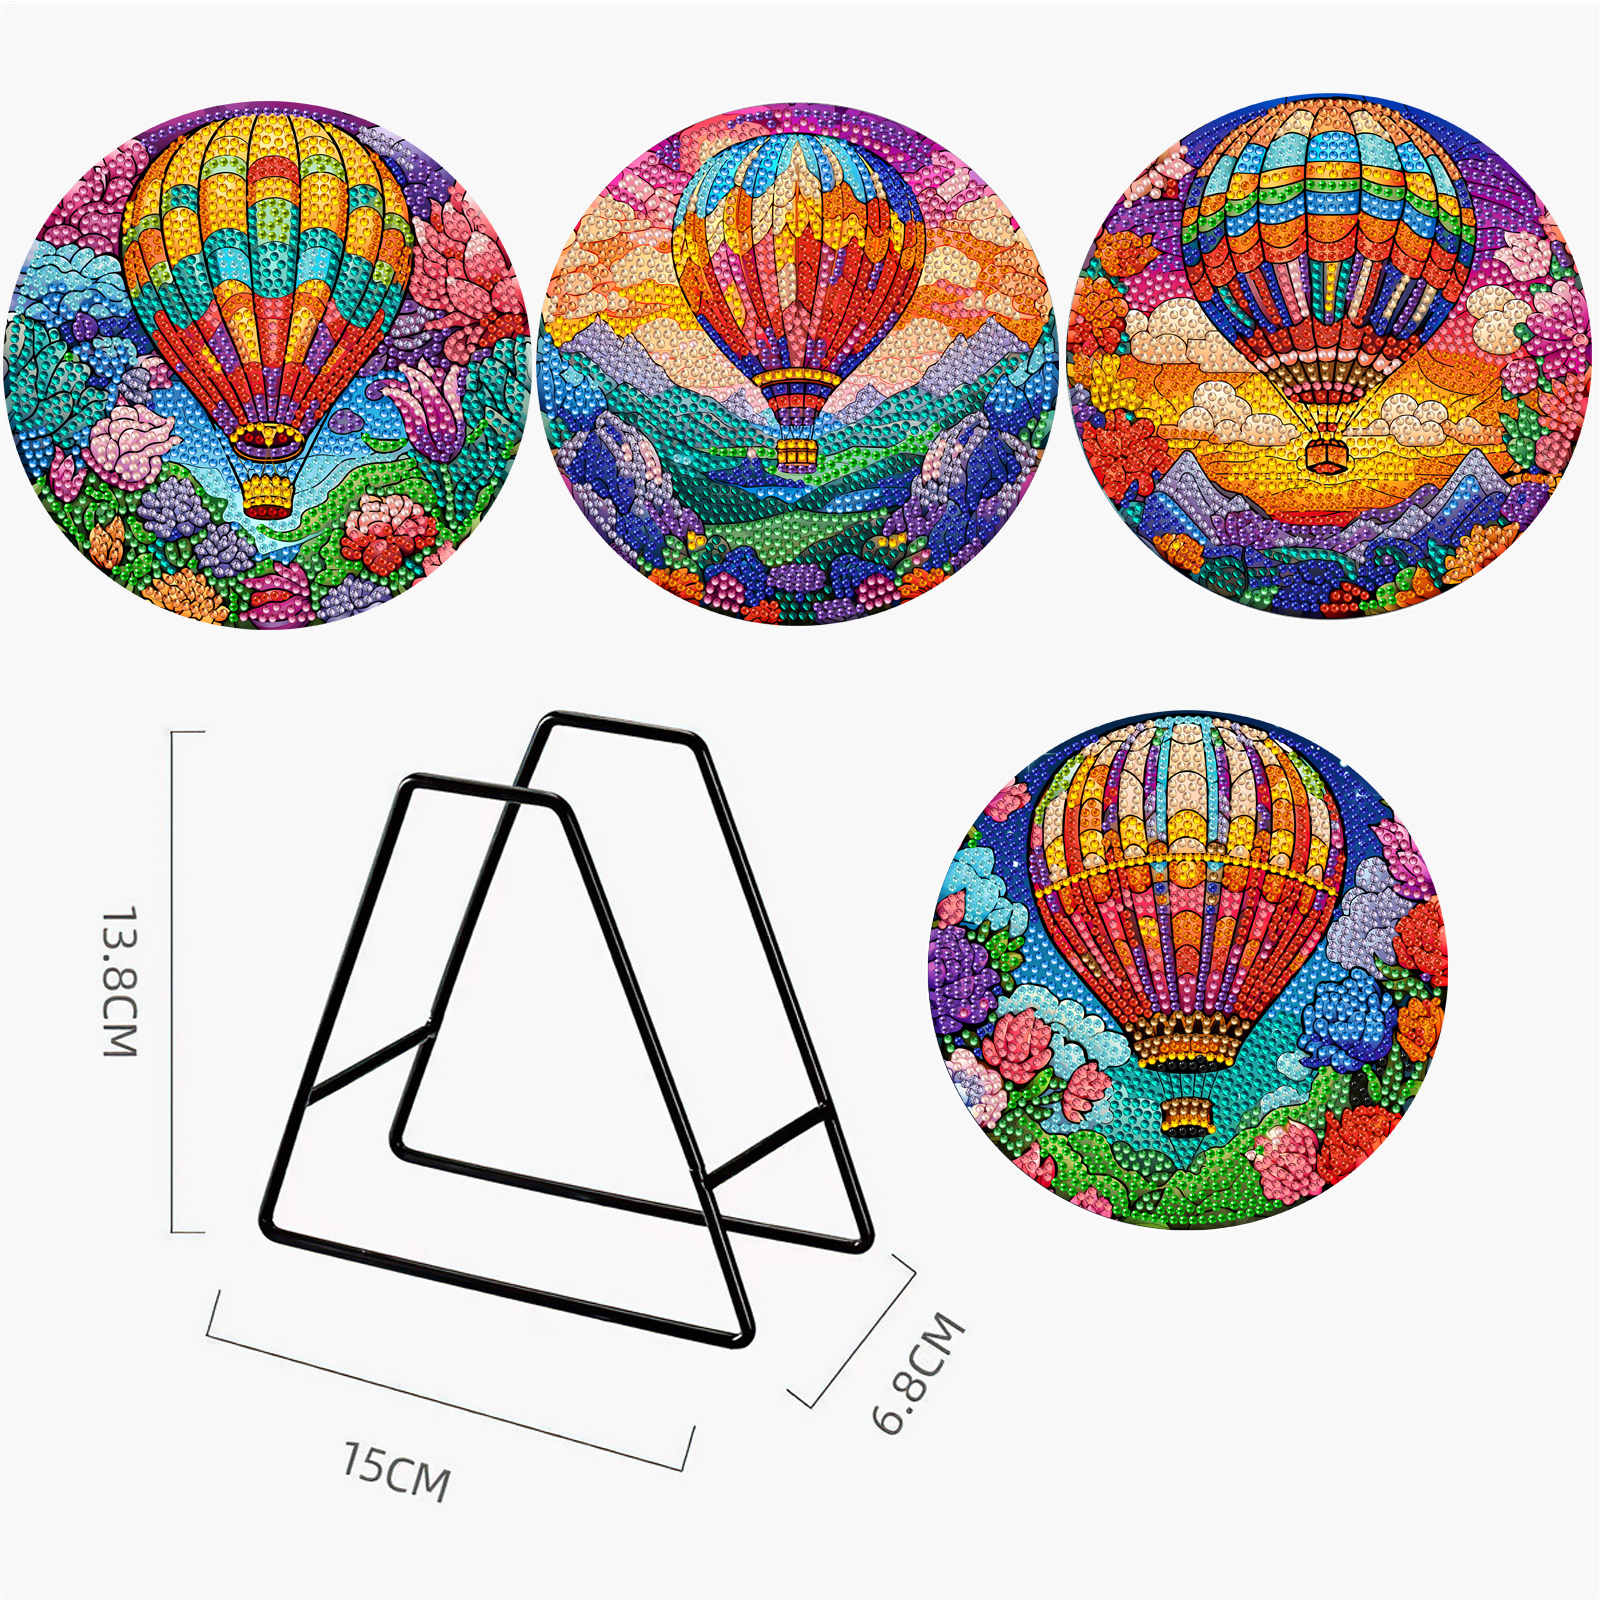 (BD488) (Acrylic) 4pcs DIY Diamond Painted Placemats, Insulated Dish Mats, Comes with Mat Storage Rack, Hot Air Balloon and Mountain